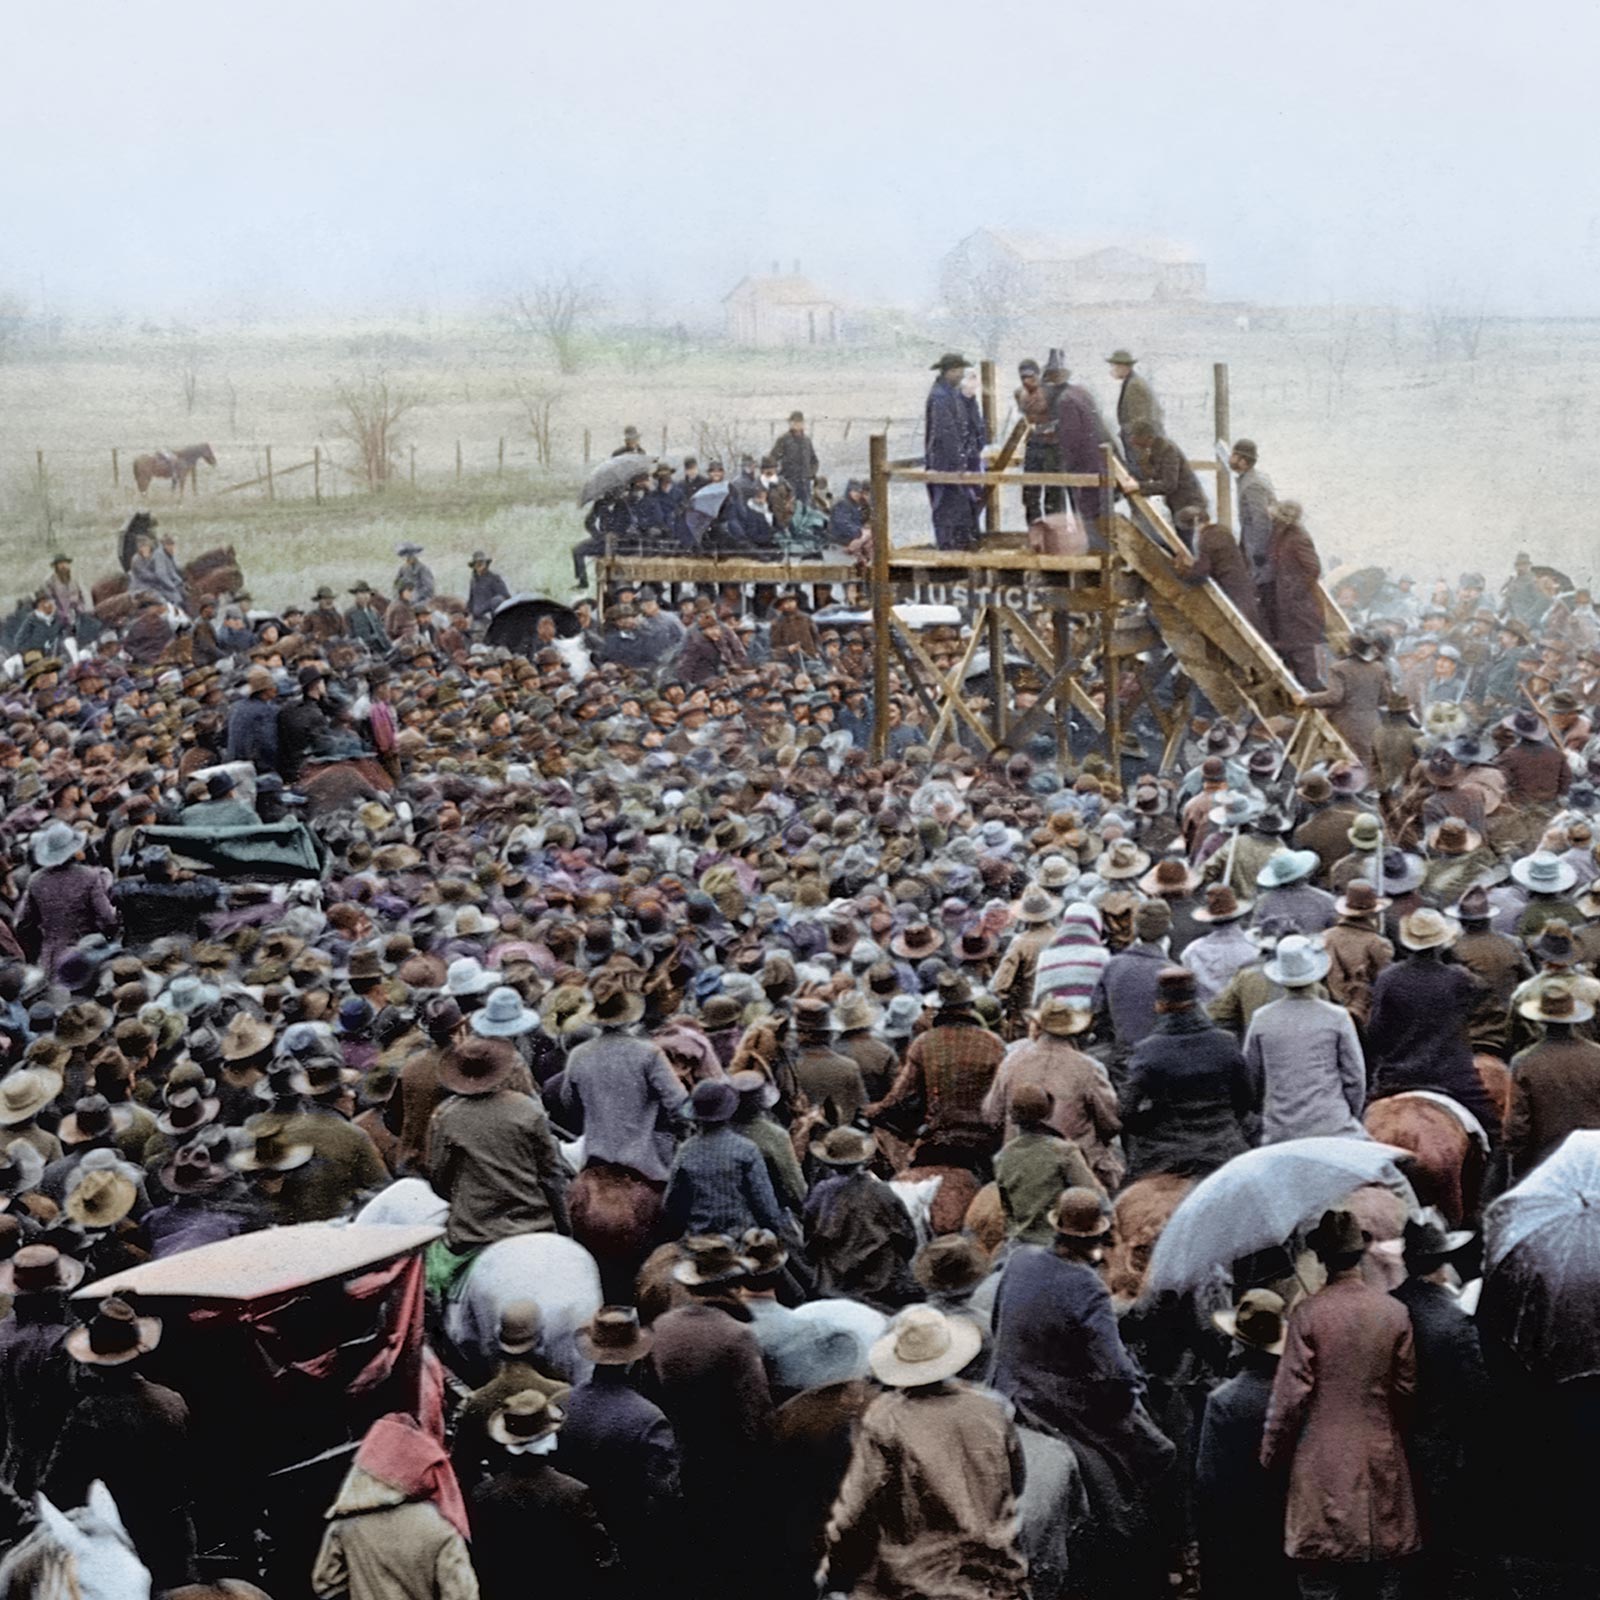 Colorized photograph shows thousands of people watching the public spectacle lynching of Henry Smith in Paris, Texas, on February 1, 1893.